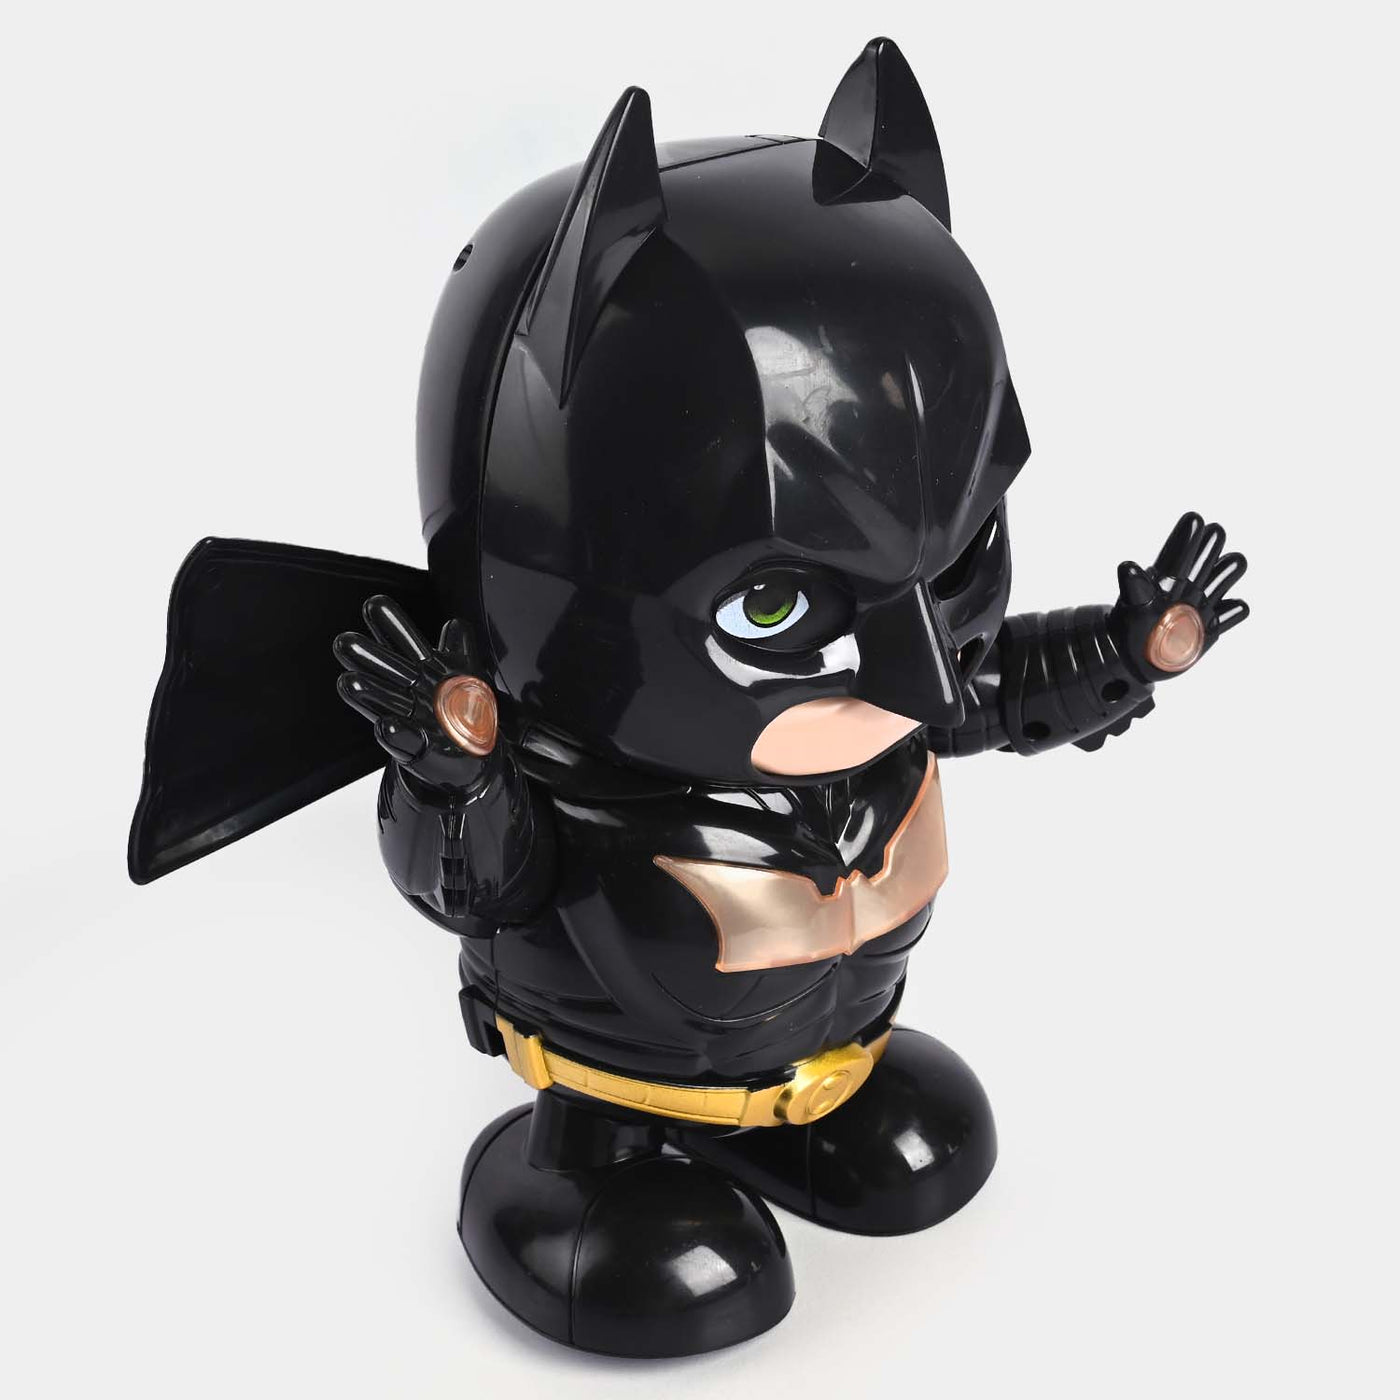 Character Dancing Hero With Light&Music Toy For Kids